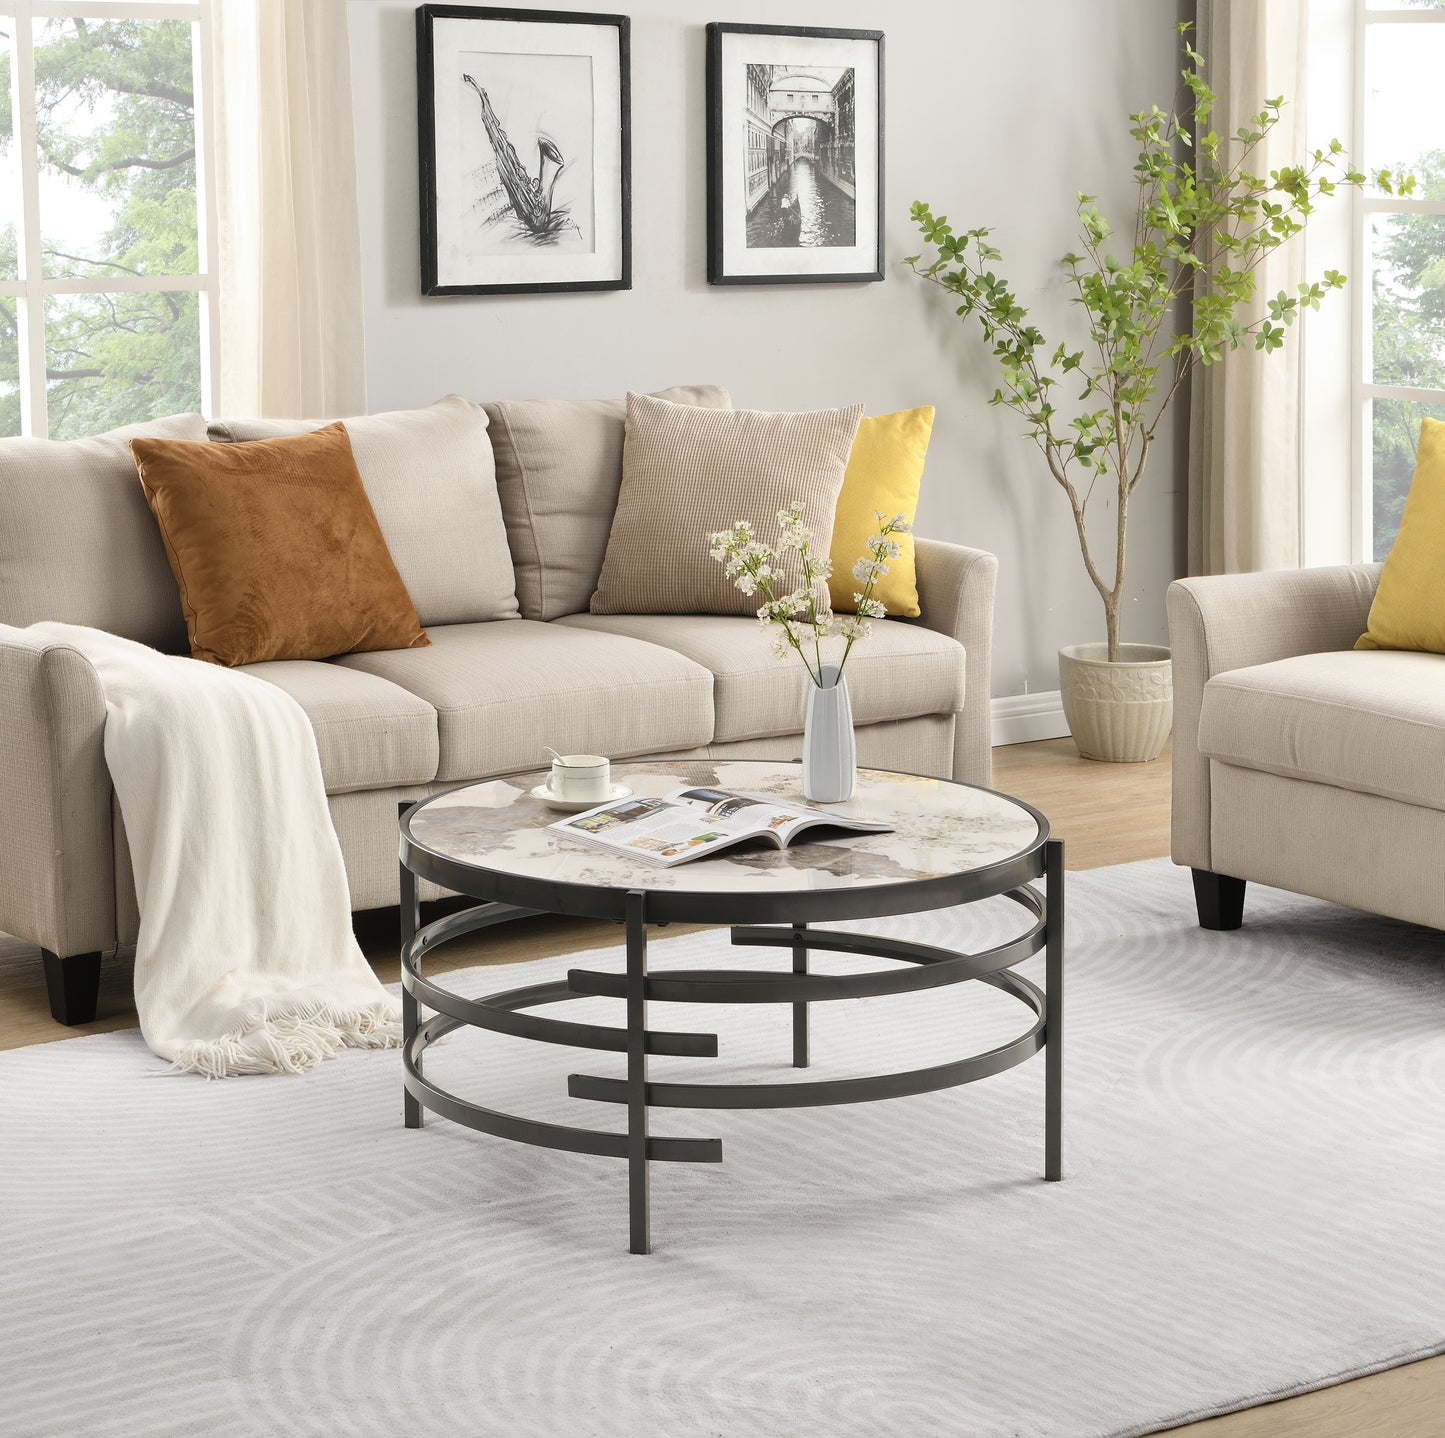 32.48'' Round  Coffee Table With Sintered Stone Top&Sturdy Metal Frame, Modern Coffee Table for Living Room, Darker Gray